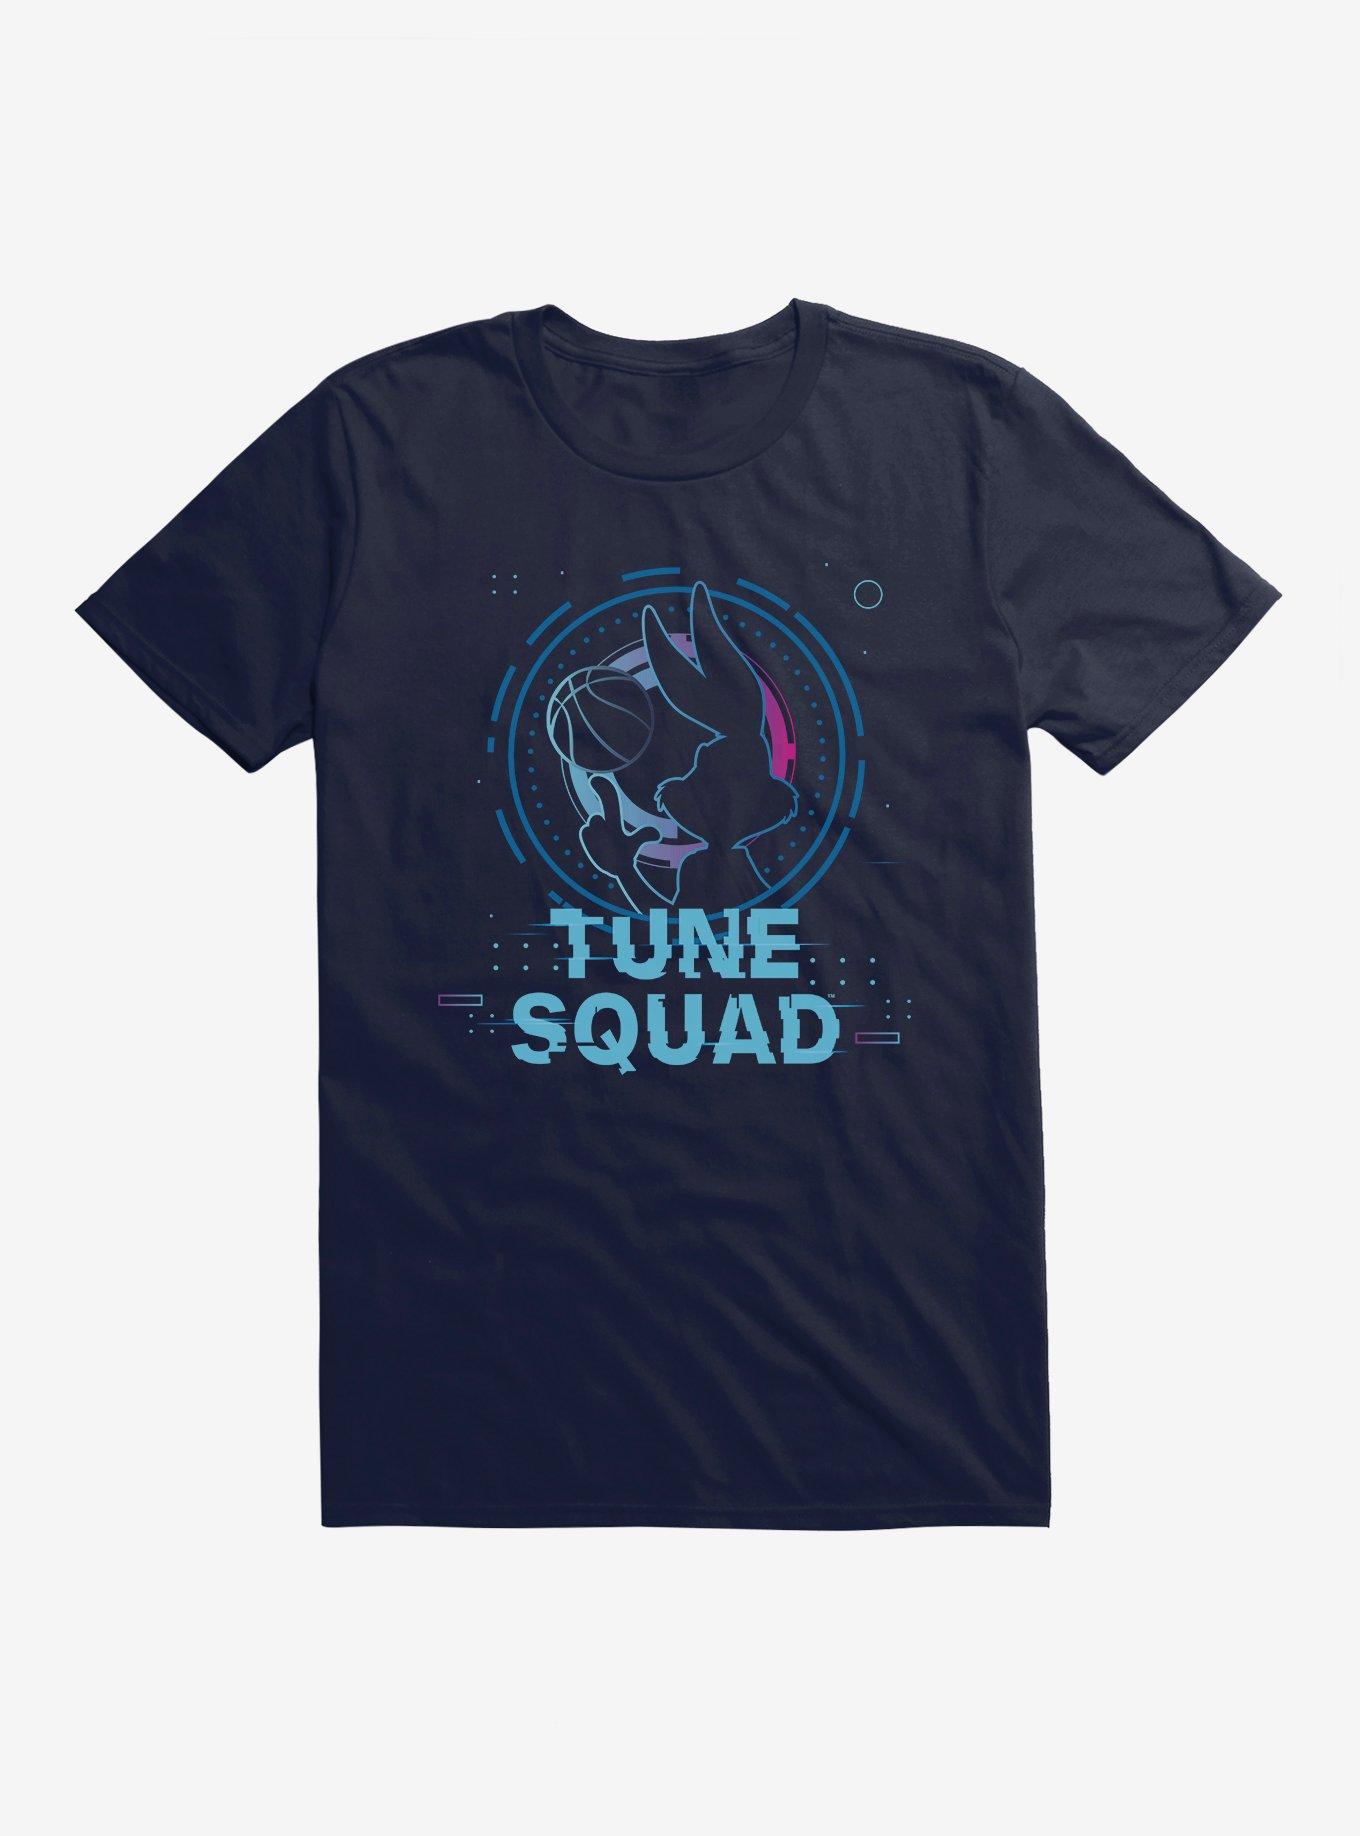 Space Jam: A New Legacy Tune Squad T-Shirt, NAVY, hi-res